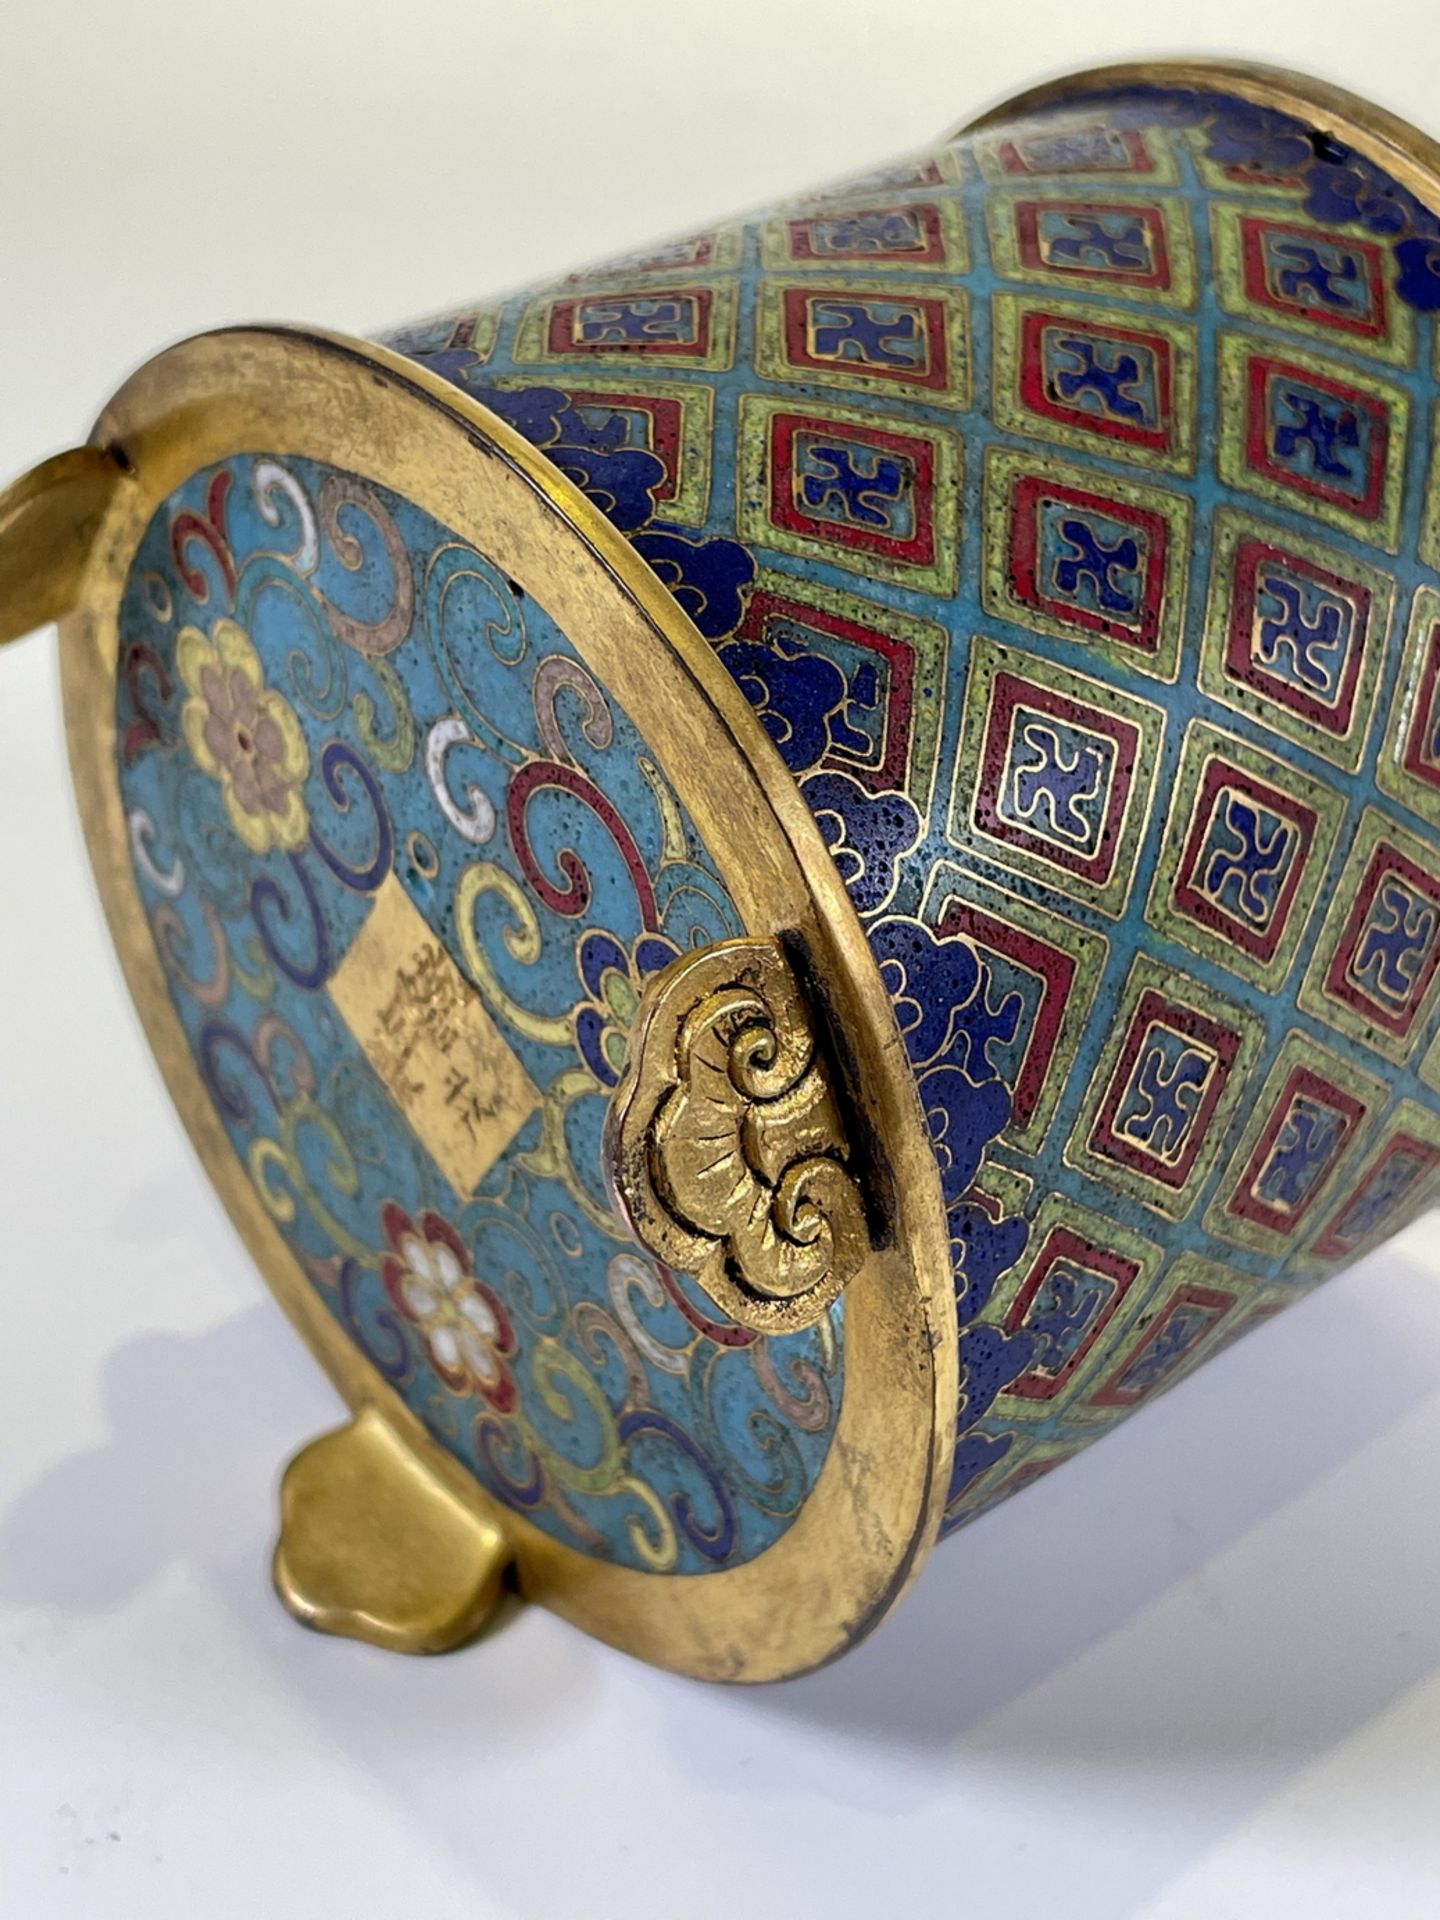 FINE CHINESE CLOISONNE, 18TH/19TH Century Pr. Collection of NARA private gallary.  - Image 8 of 11